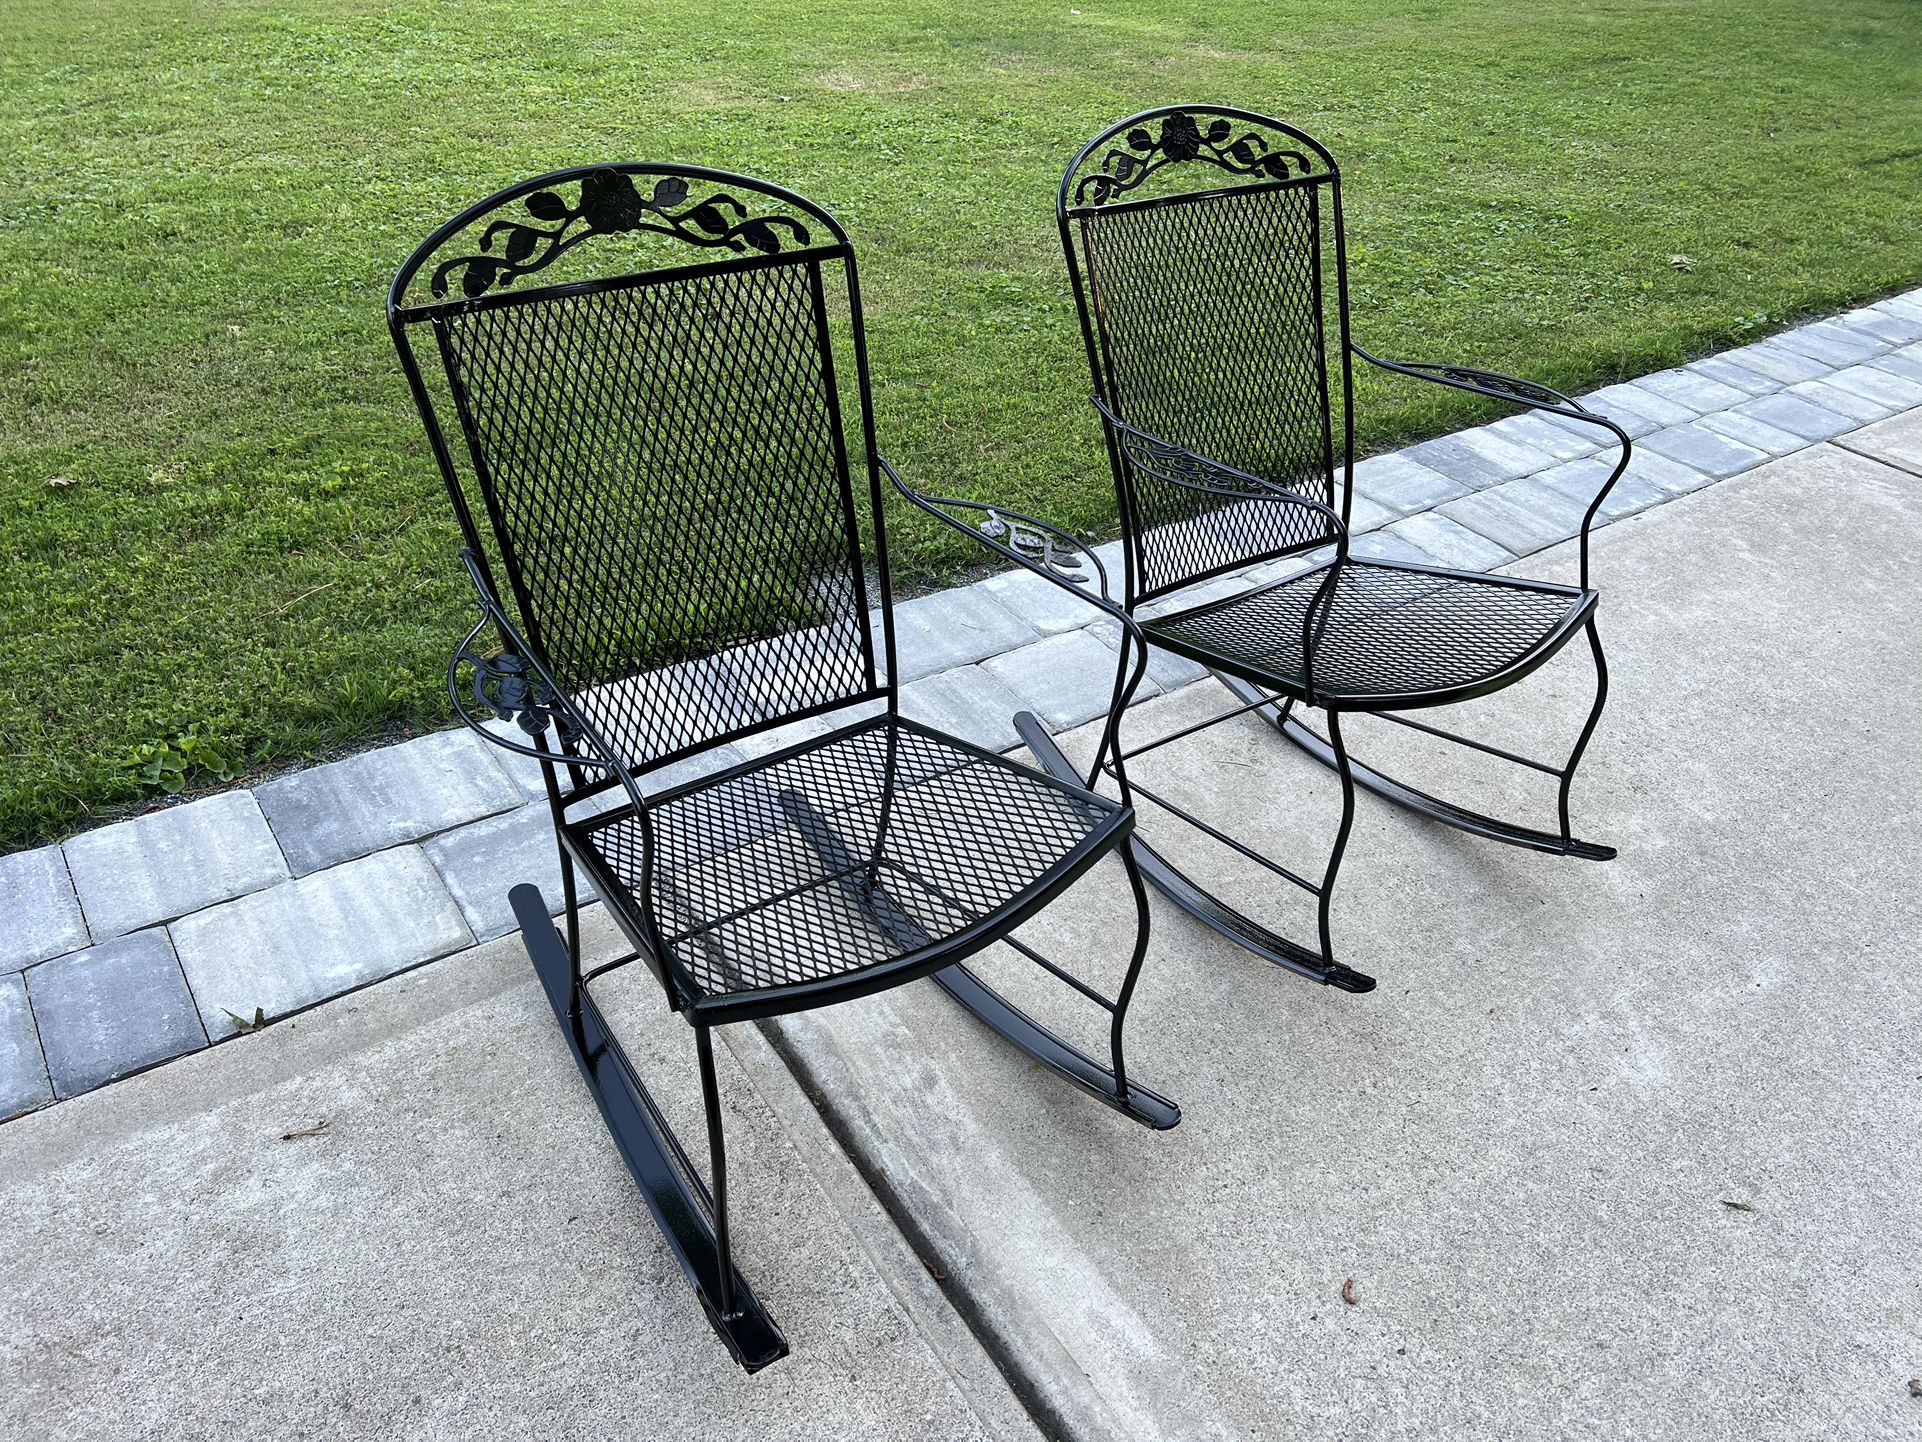 2 REFINISHED Vintage Wrought Iron Victorian Rocking chairs $399 CAN DELIVER!